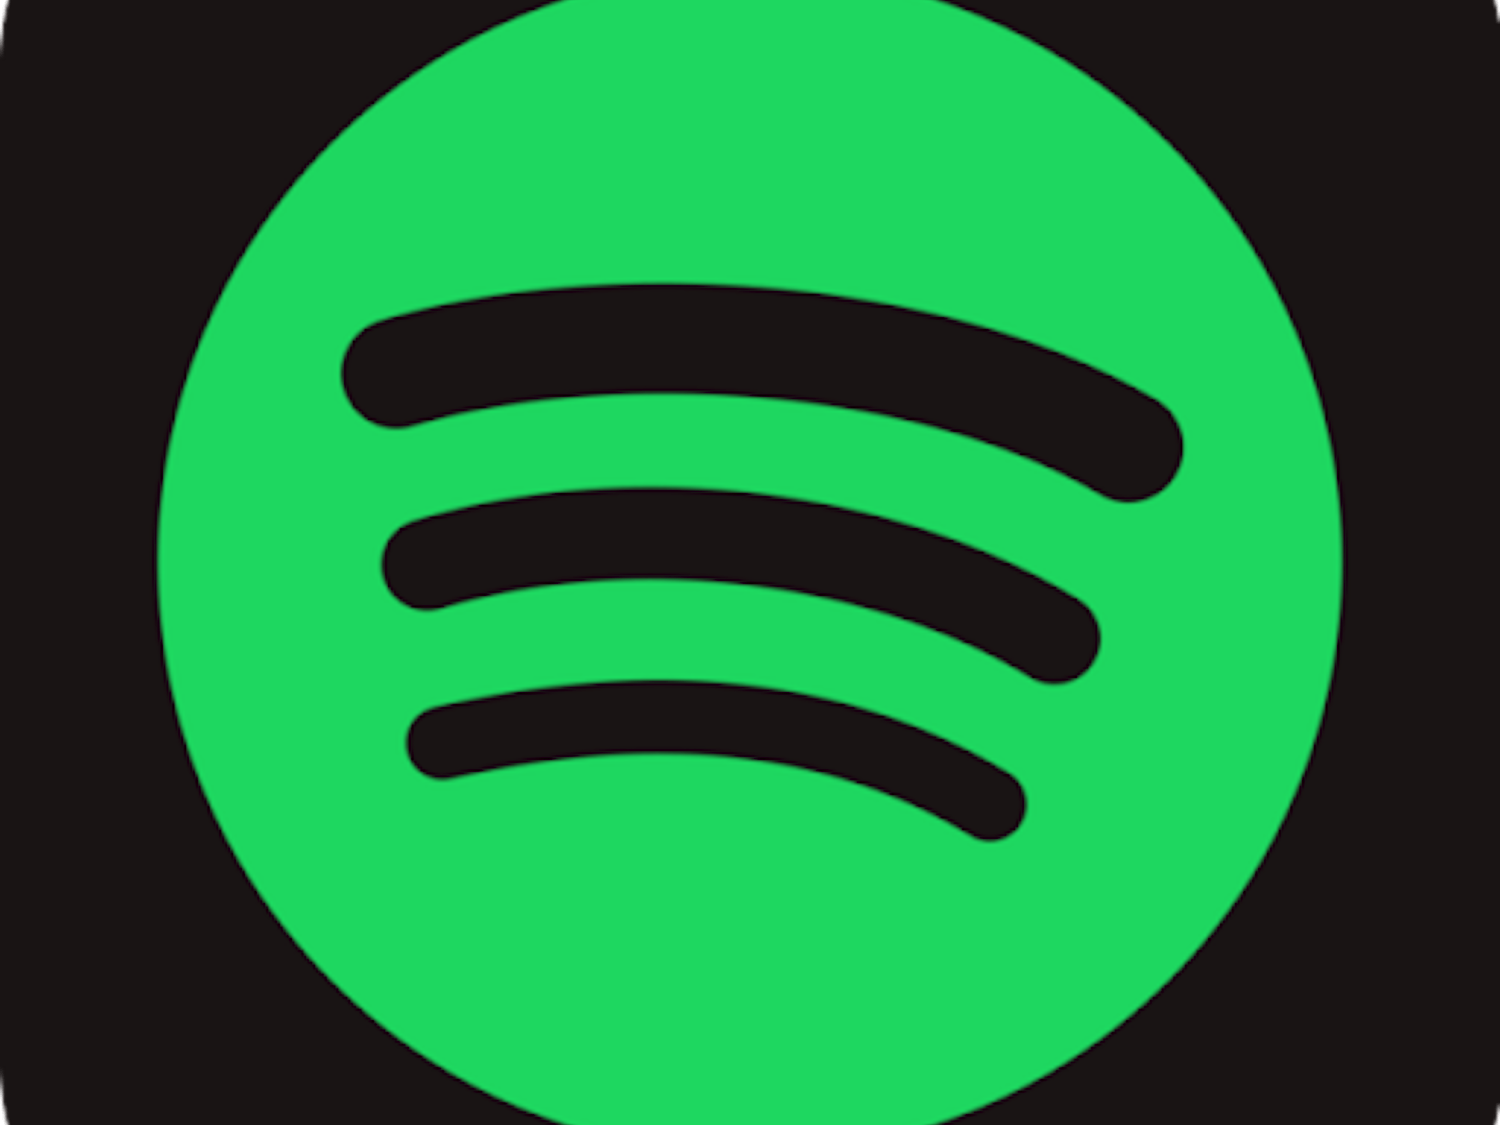 Daylist is a single playlist that transforms itself into something new to perfectly suit users’ usual vibes at different times. (Photo courtesy of Wikimedia Commons / Spotify, Jan. 1, 2020).